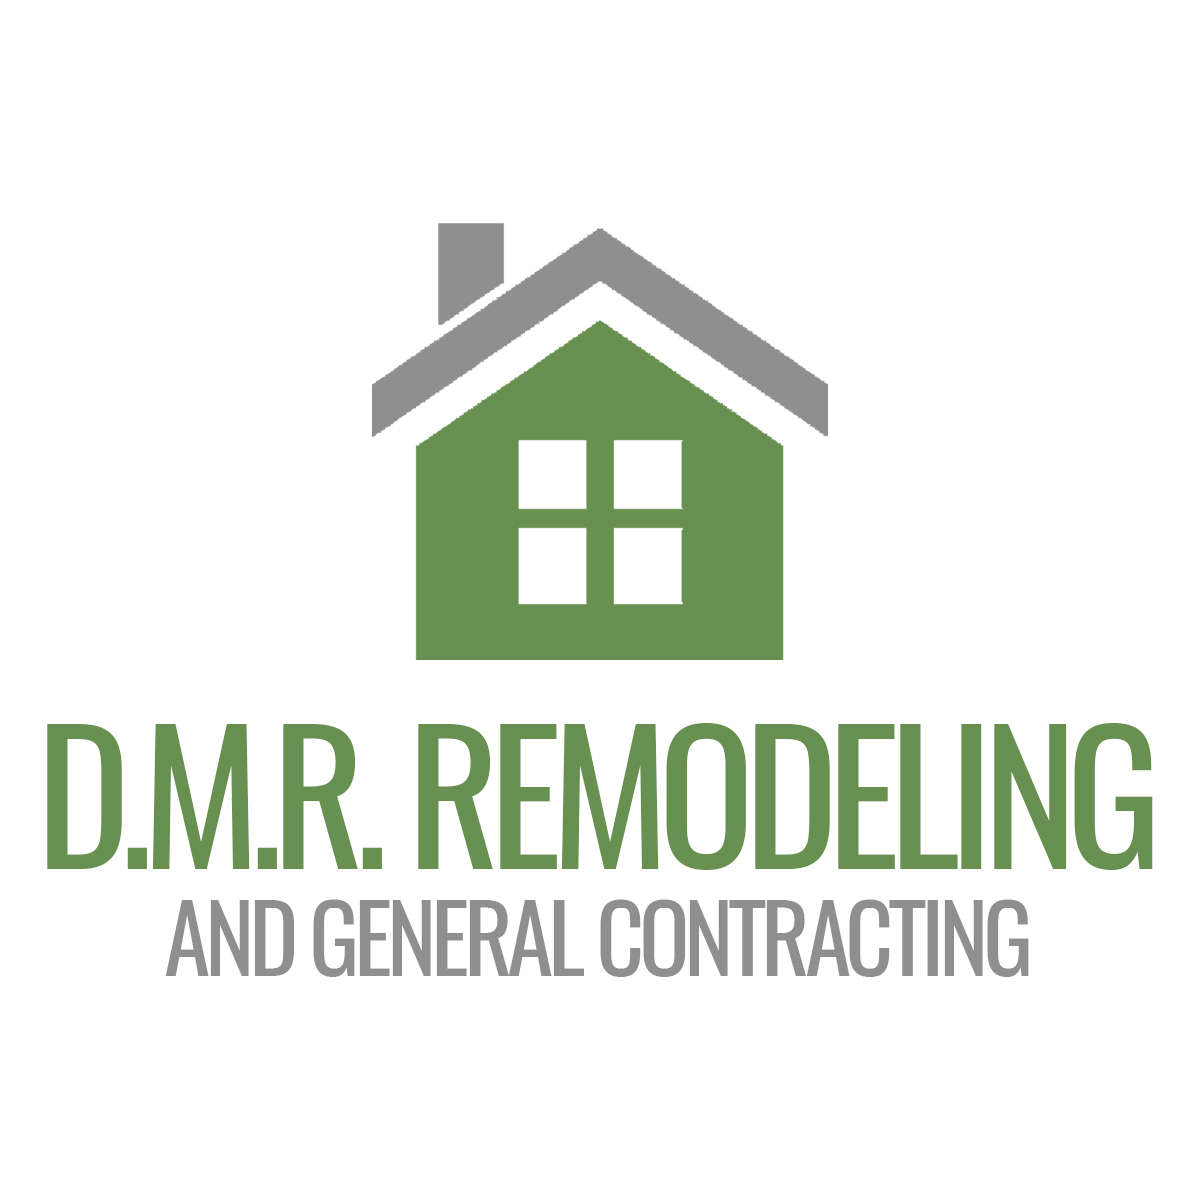 D.M.R. Remodeling and General Contracting Logo